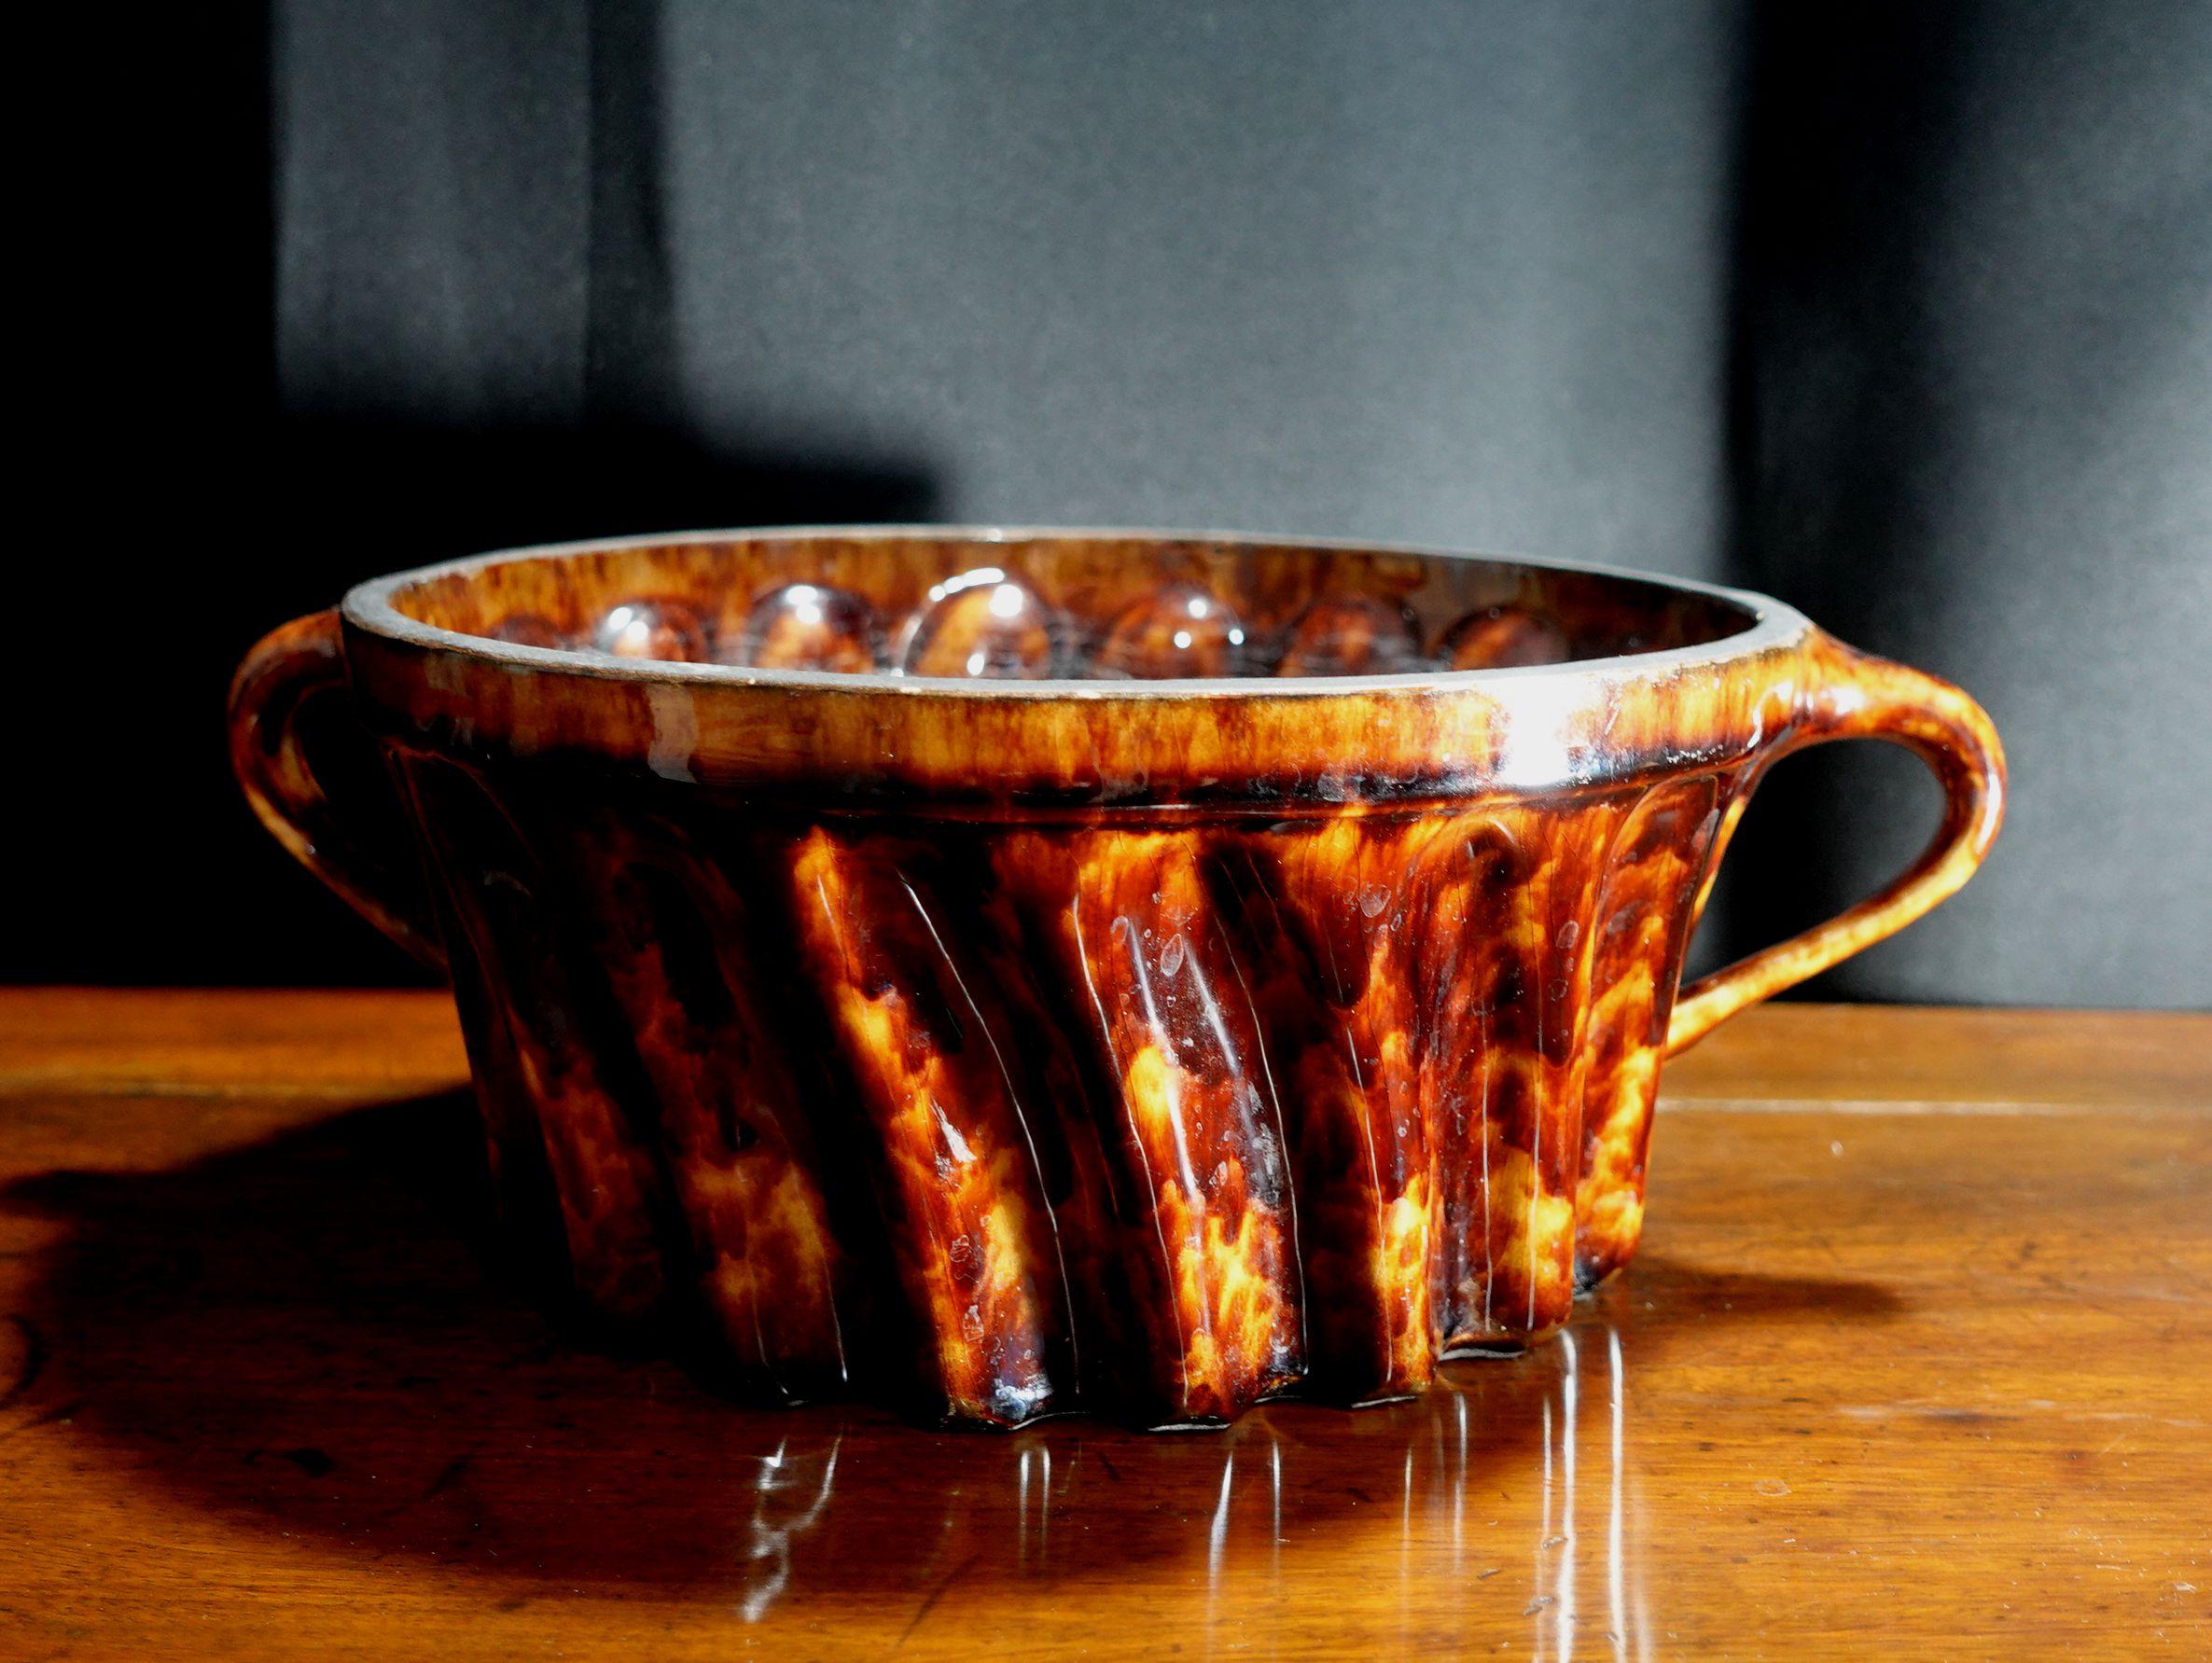 Tortoise shell pattern glass bowl
100% hand-made depicting the pattern of tortoise with bent waving shapes.
Two handles on each side.